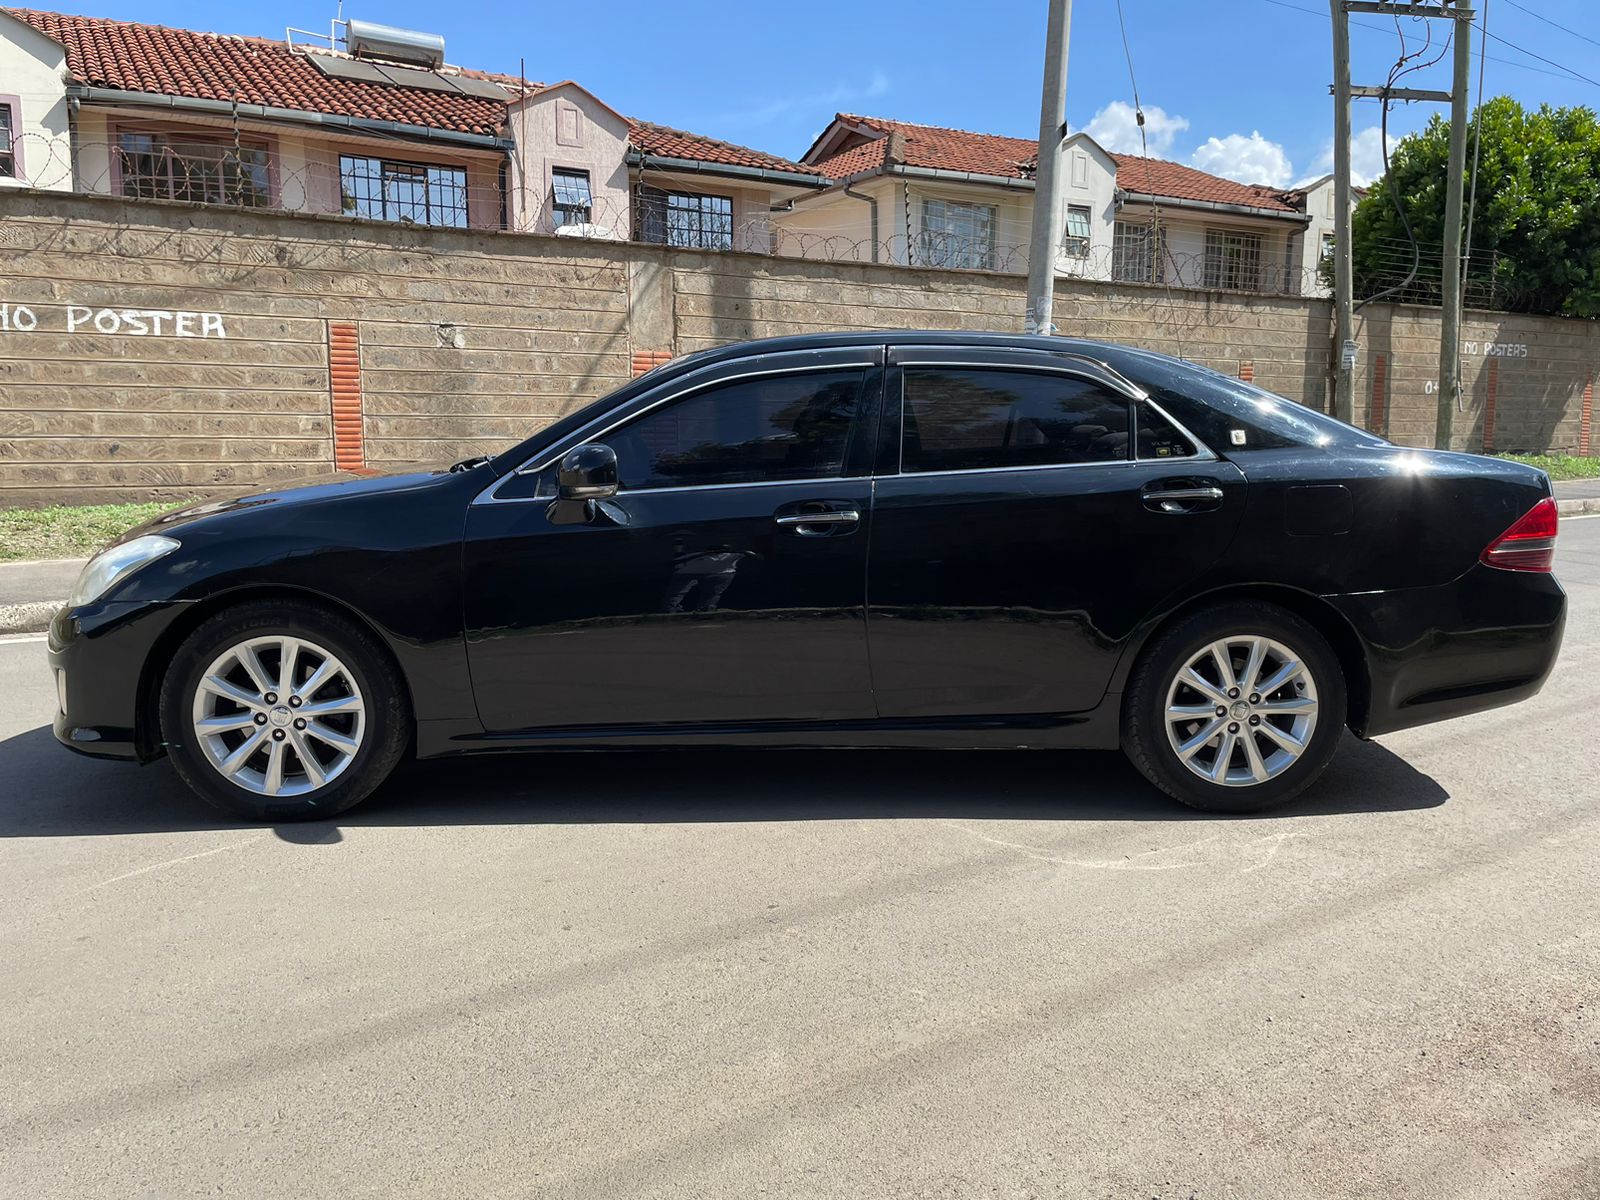 Toyota CROWN 2010 Royal Saloon You pay Deposit Trade in Ok For Sale in Kenya